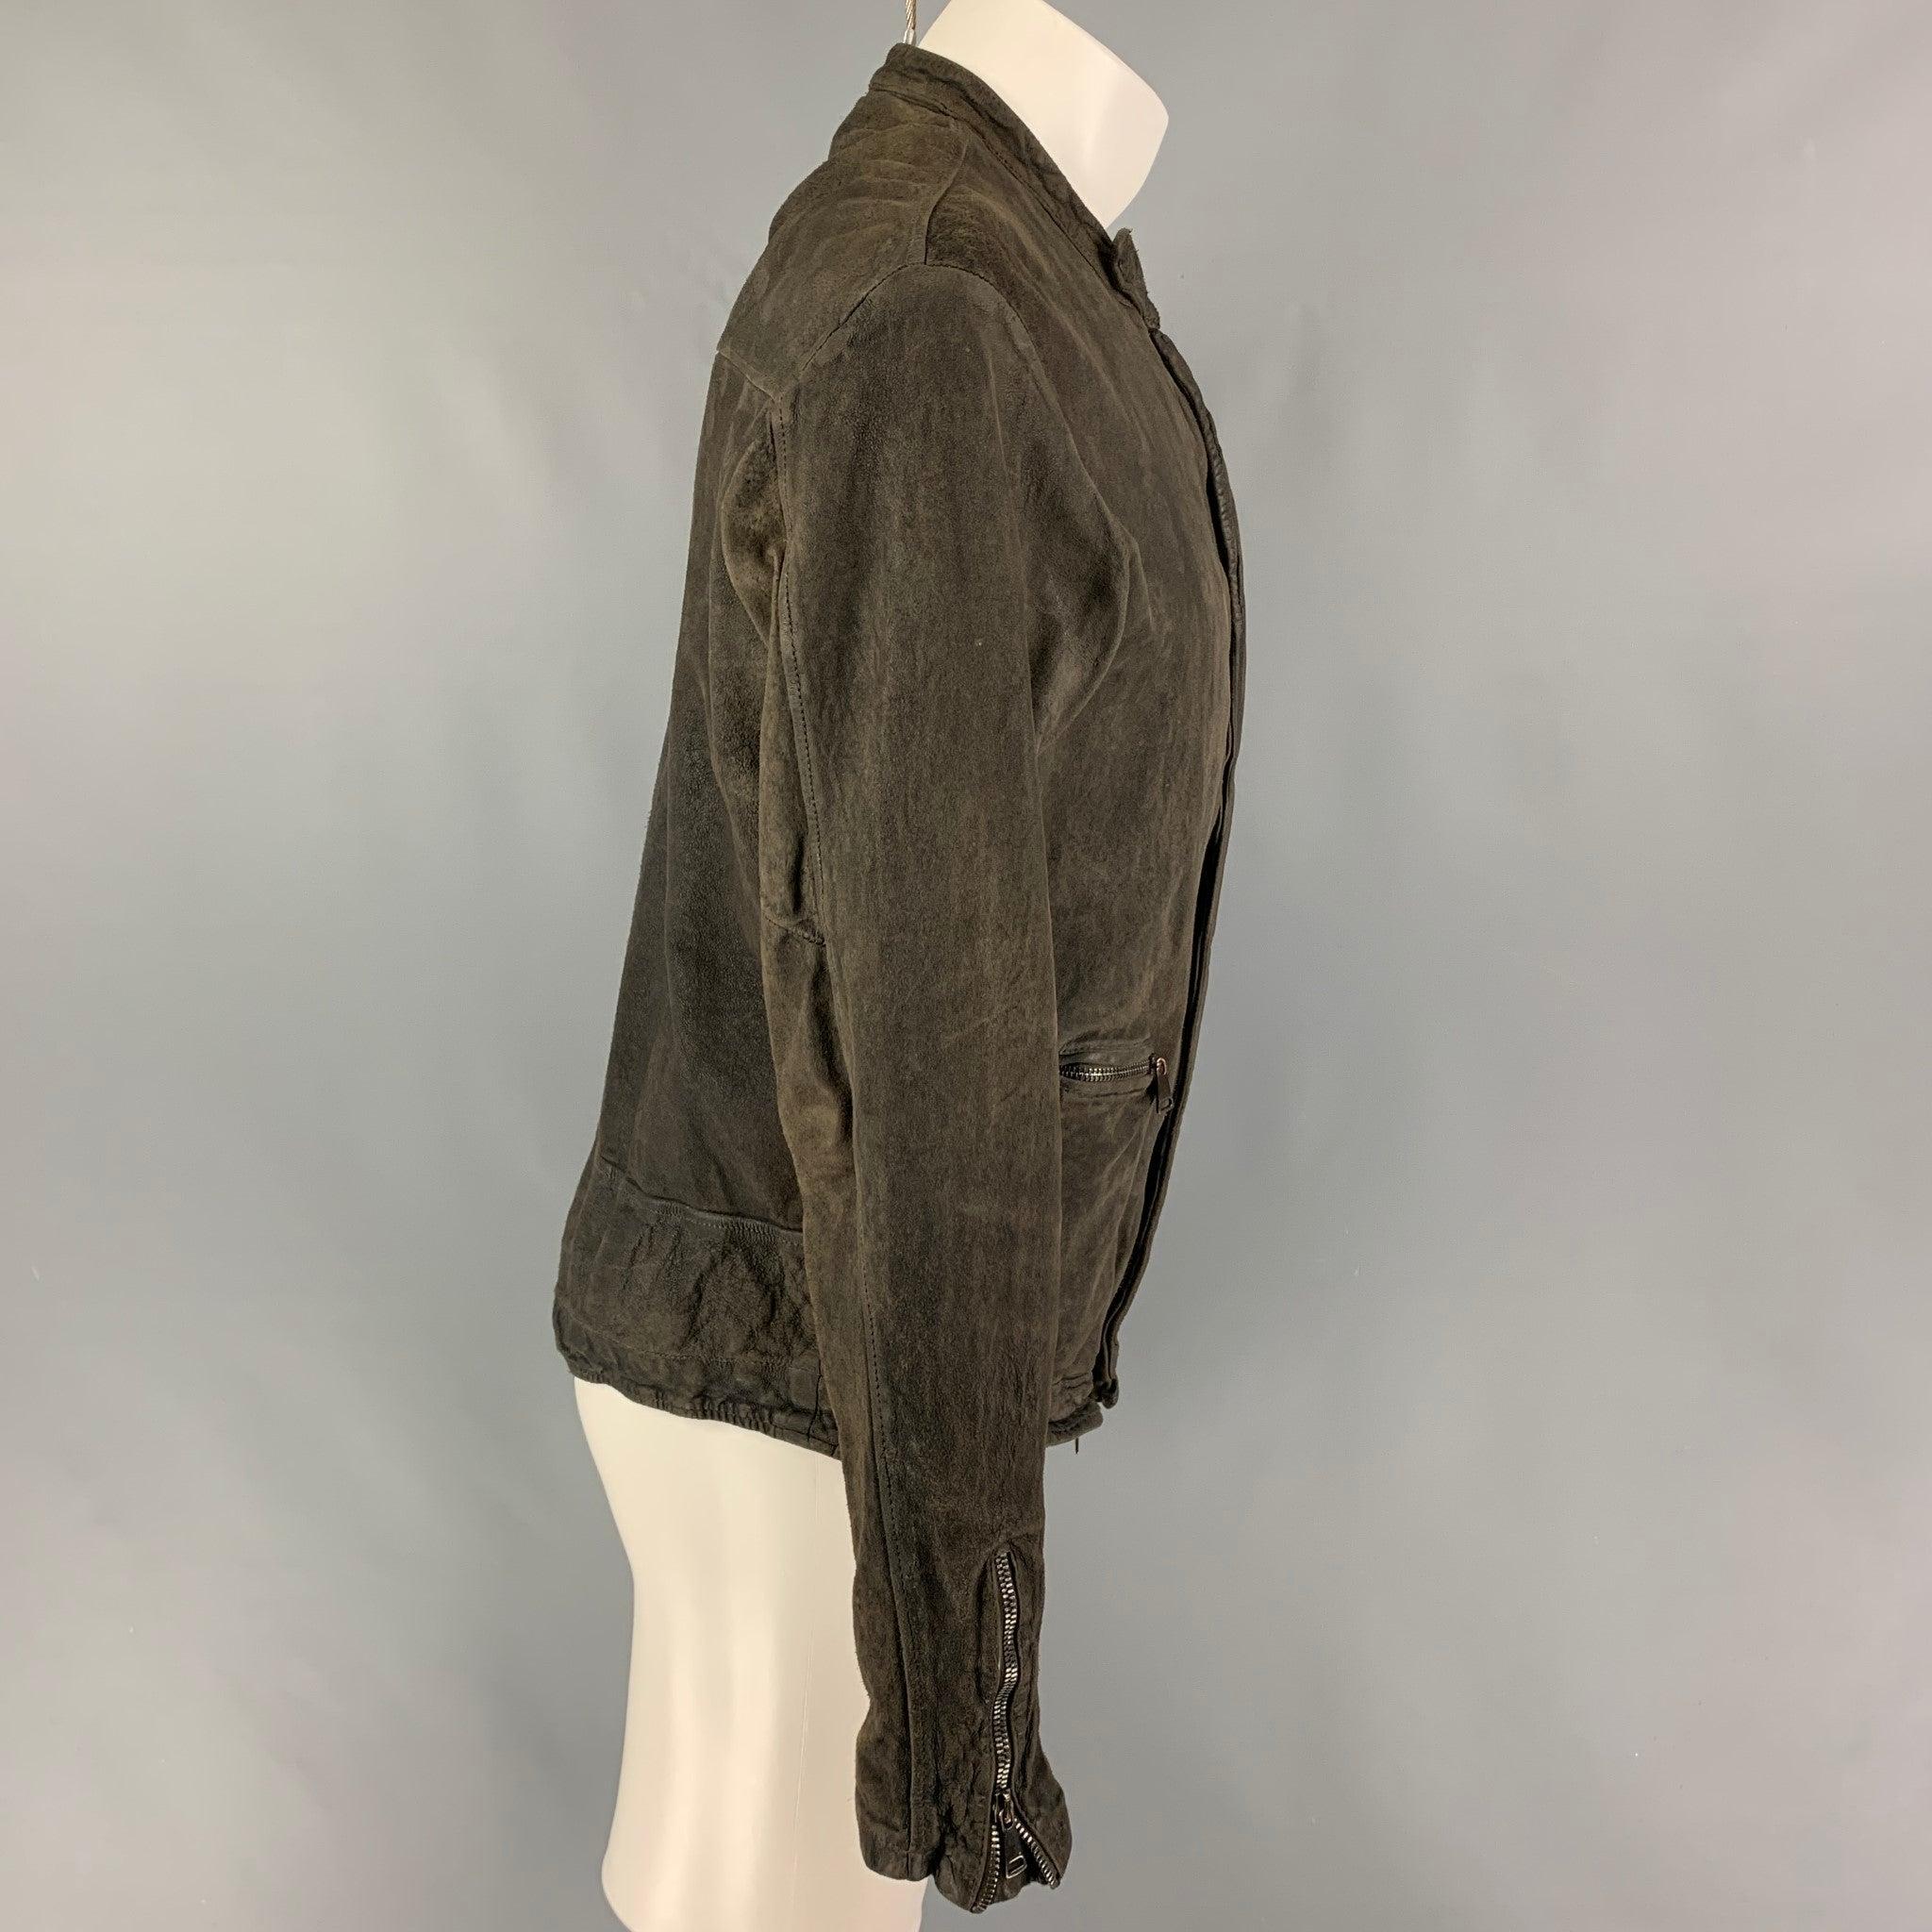 GIORGIO BRATO jacket comes in a charcoal distressed vegetable tanned leather featuring front zipper pockets, strap collar, zipped cuffs, and a full zip up closure. Made in Italy.
Very Good
Pre-Owned Condition. 

Marked:   50 

Measurements: 
